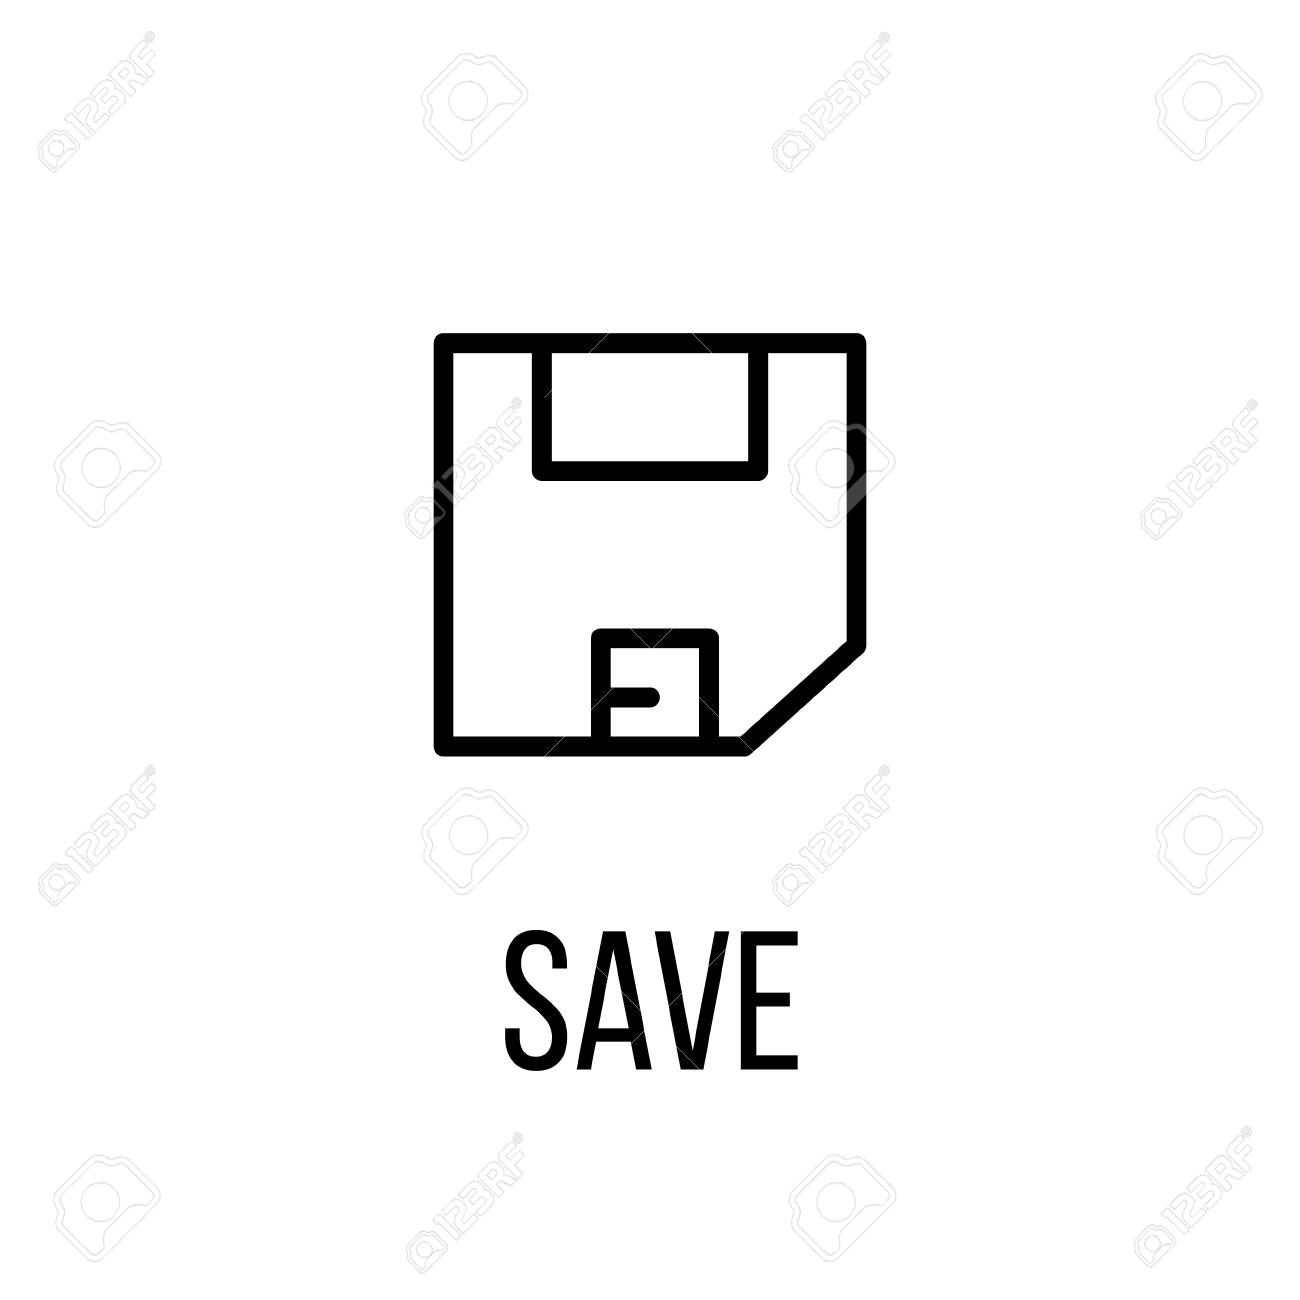 69424048-save-icon-or-logo-in-modern-line-style-high-quality-black-outline-pictogram-for-web-site-design-and.jpg